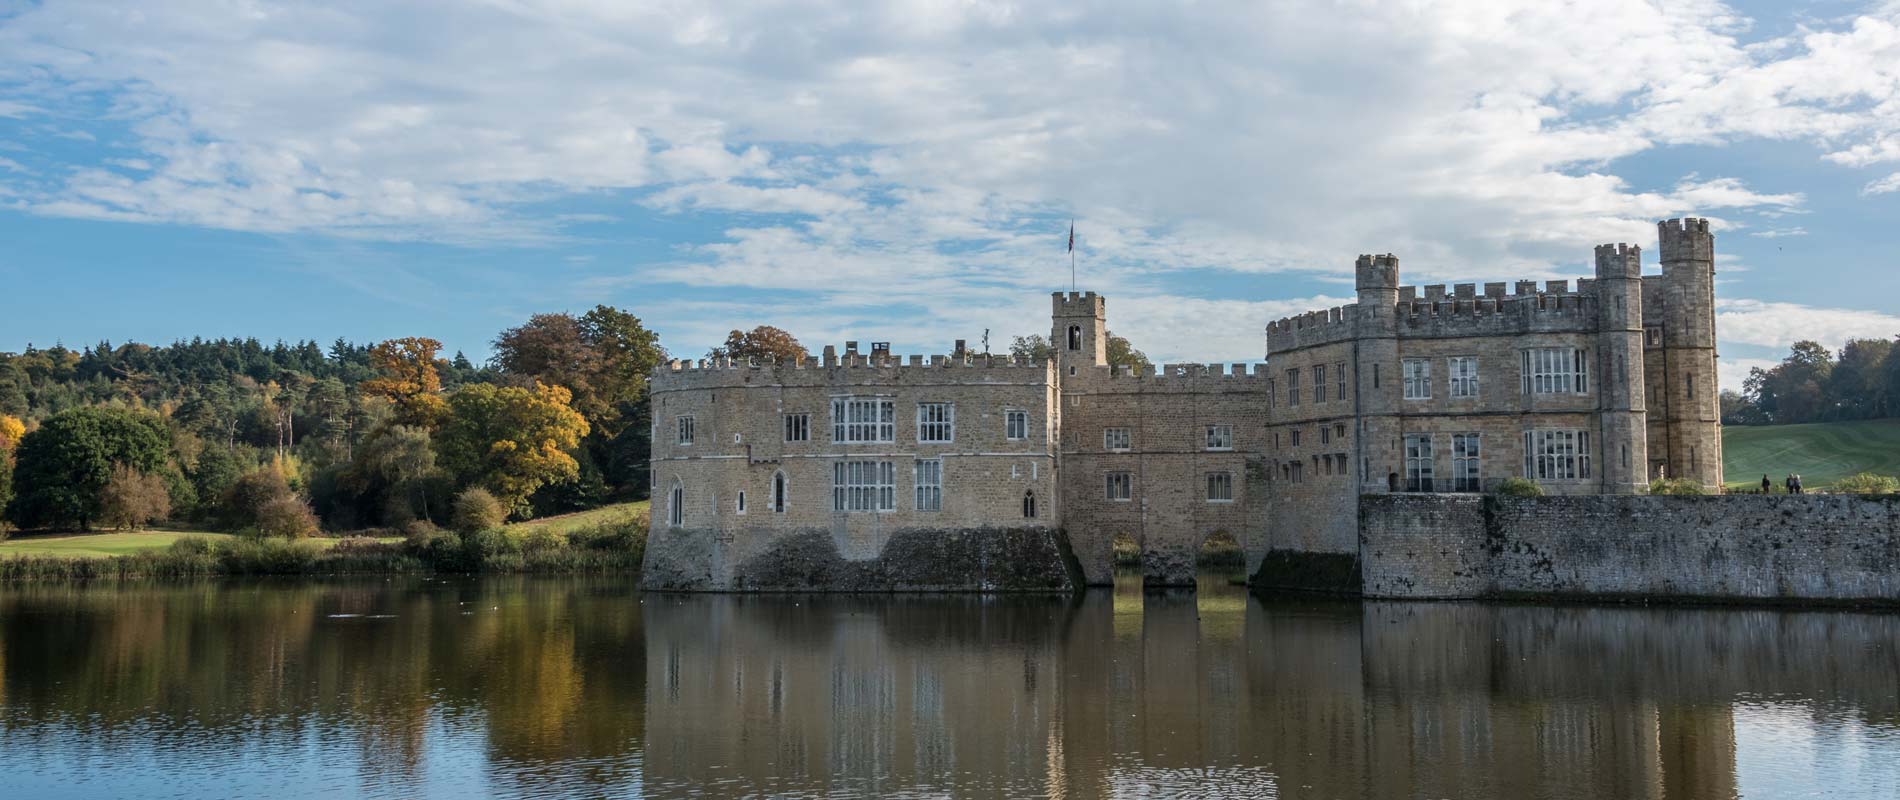 Leeds Castle in Kent surrounded by trees and lake